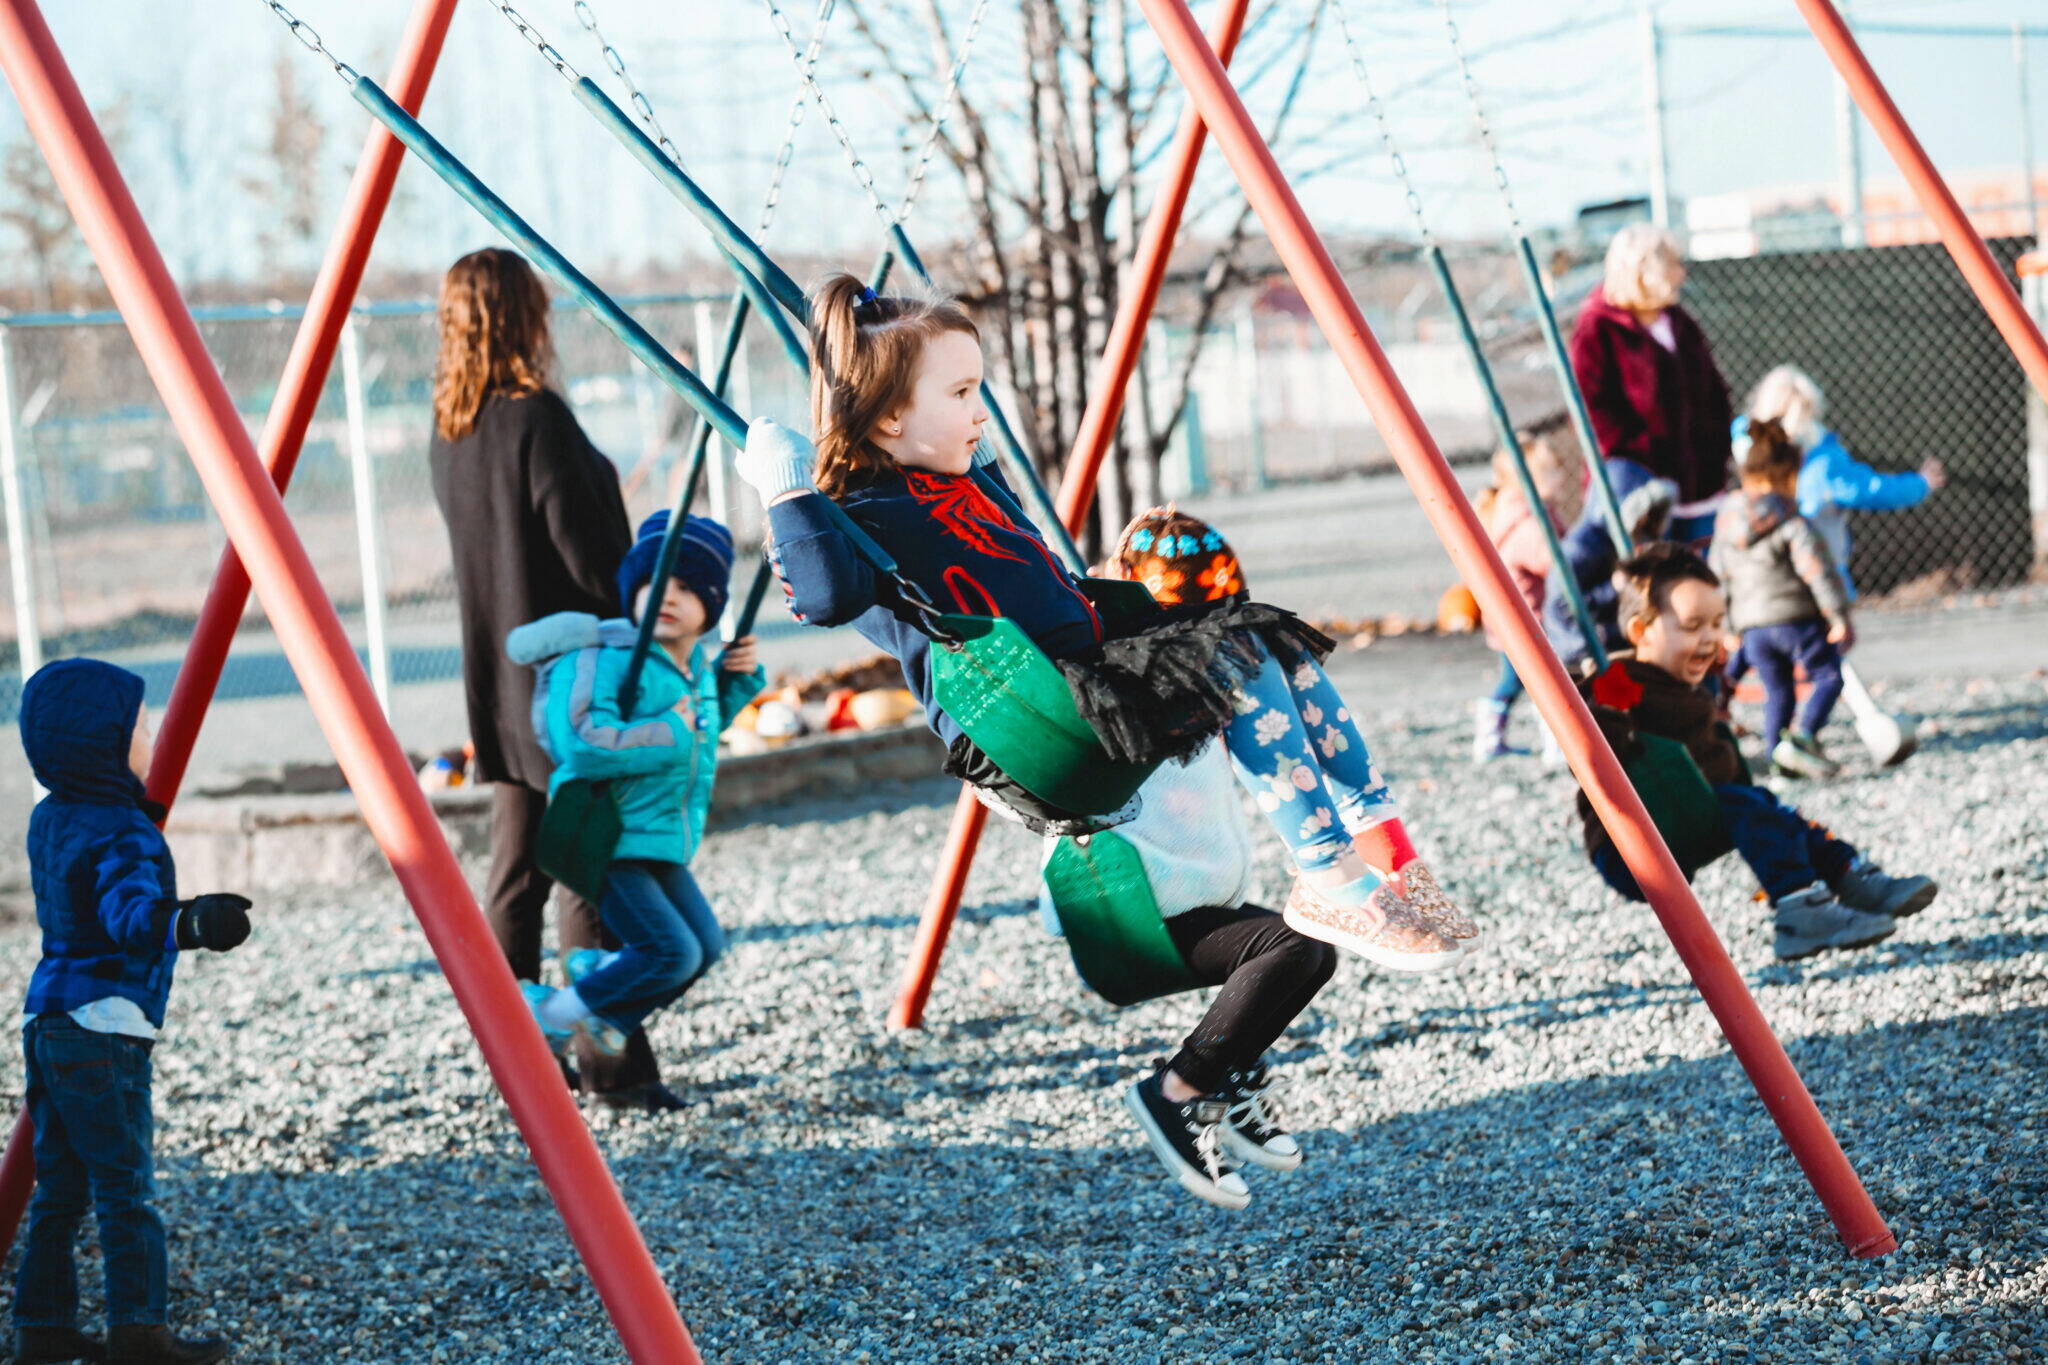 Students swing on a playground at Meadow Lakes Head Start in Wasilla. (Image by Lela Seiler, courtesy of CCS Early Learning)